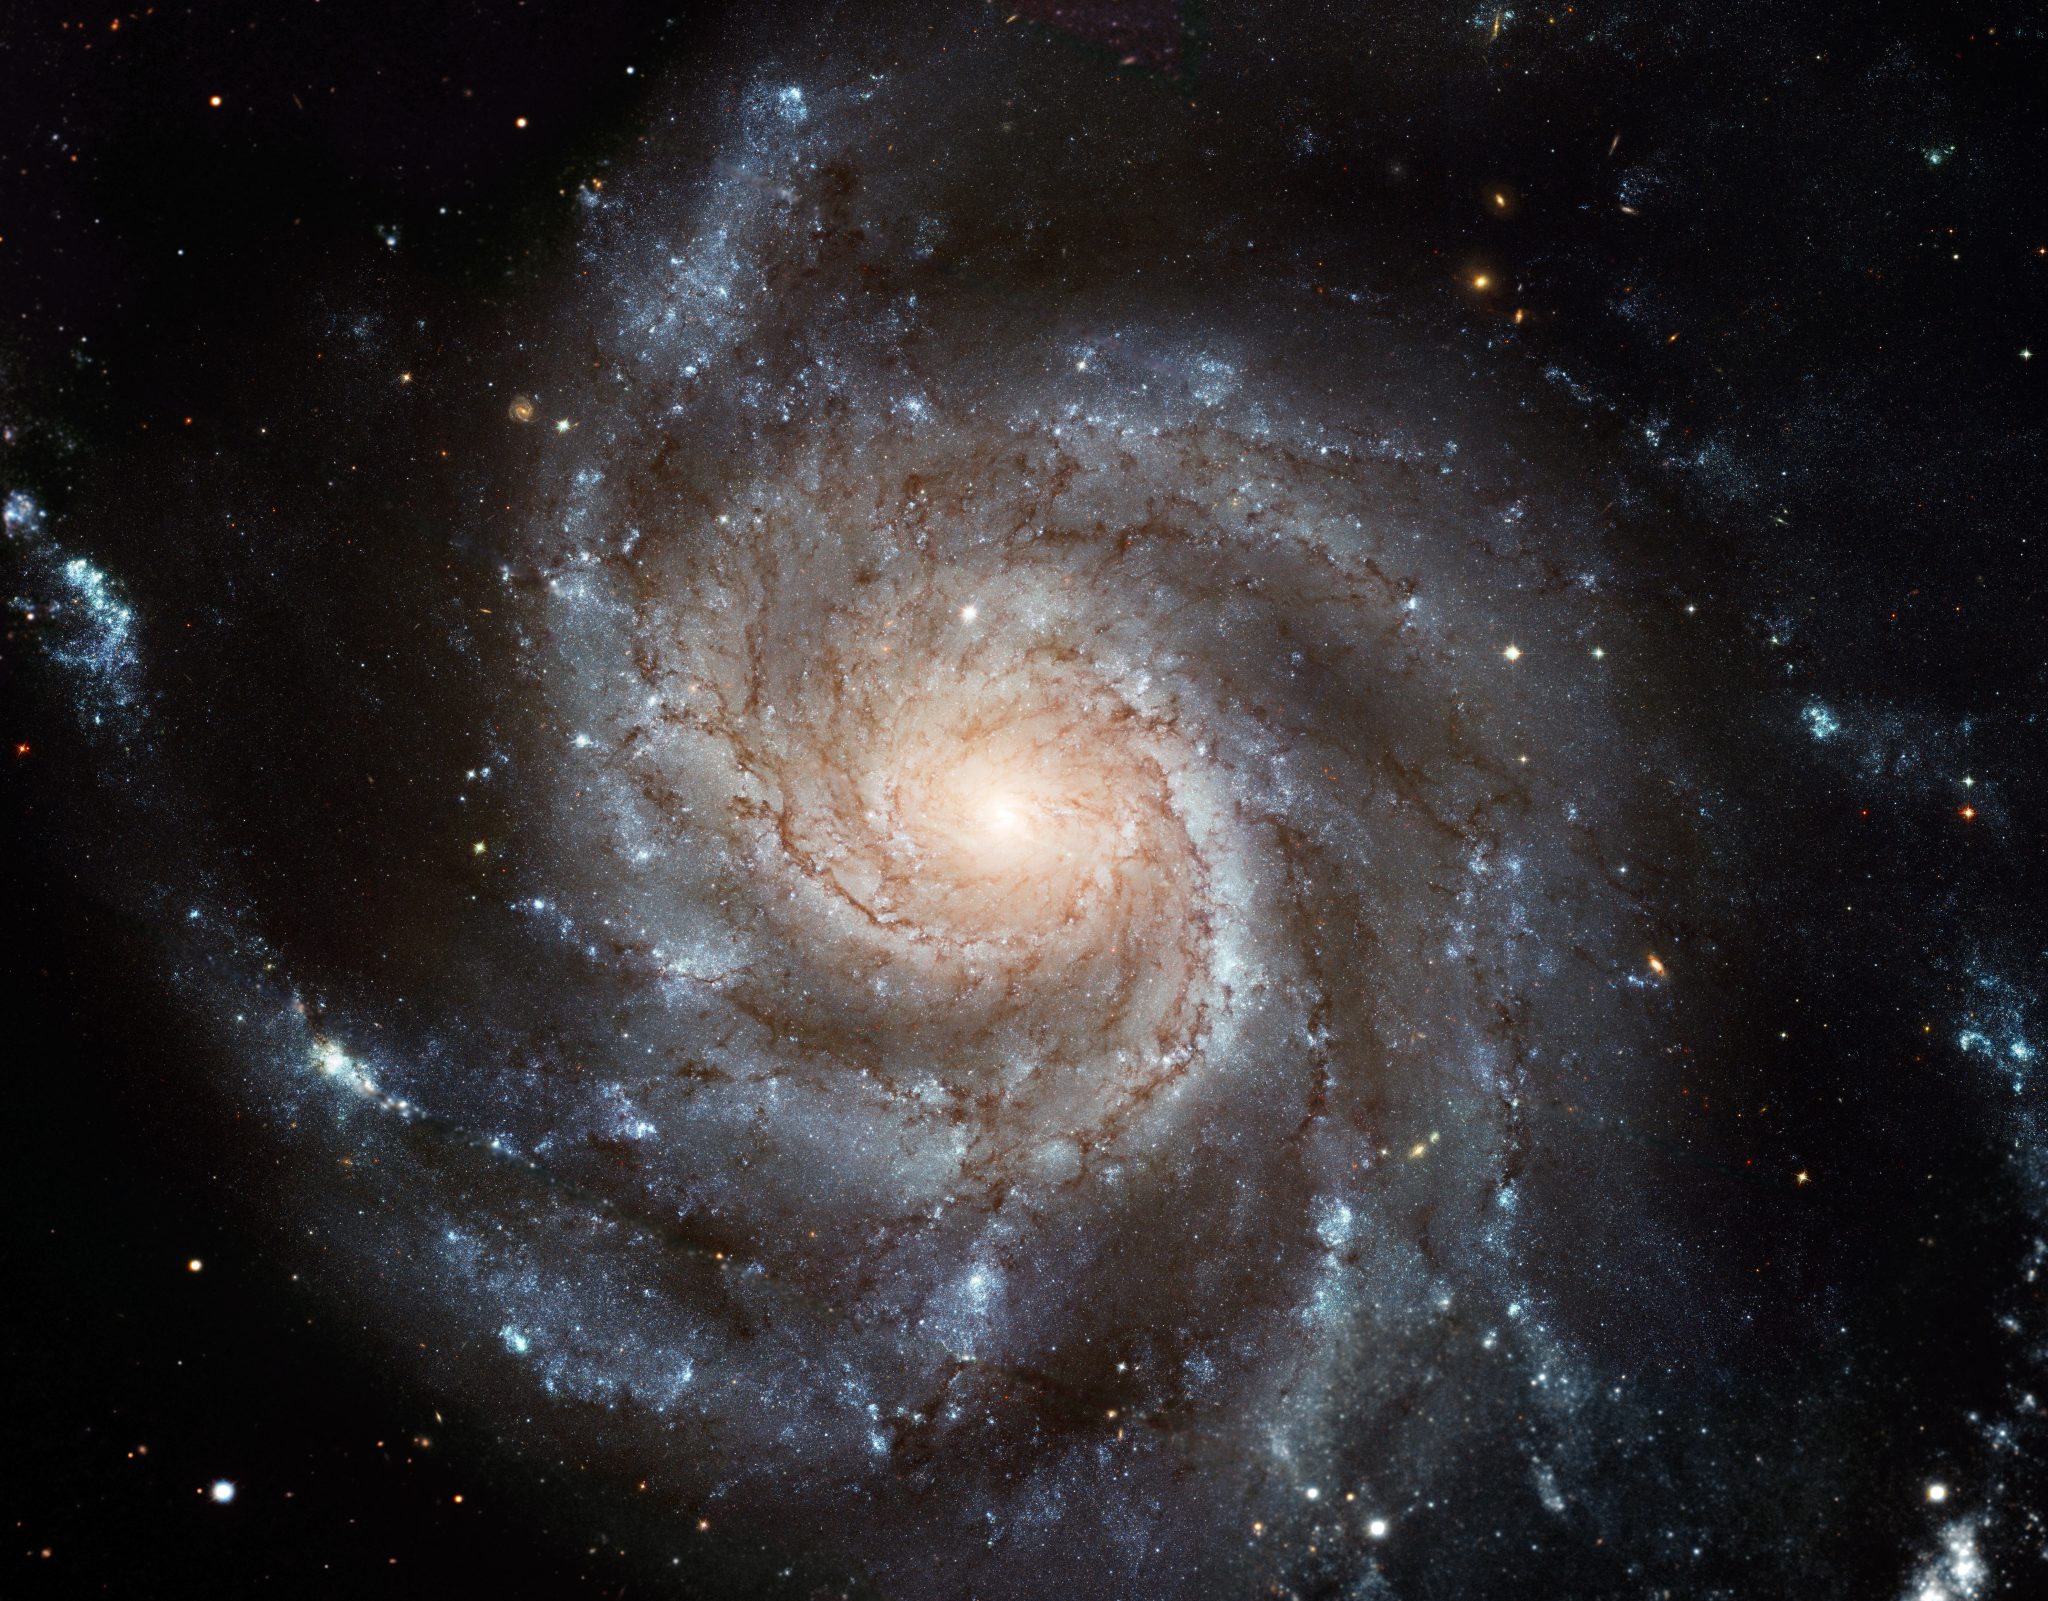 Hubble Space Telescope Photo of Messier 101 Galaxy